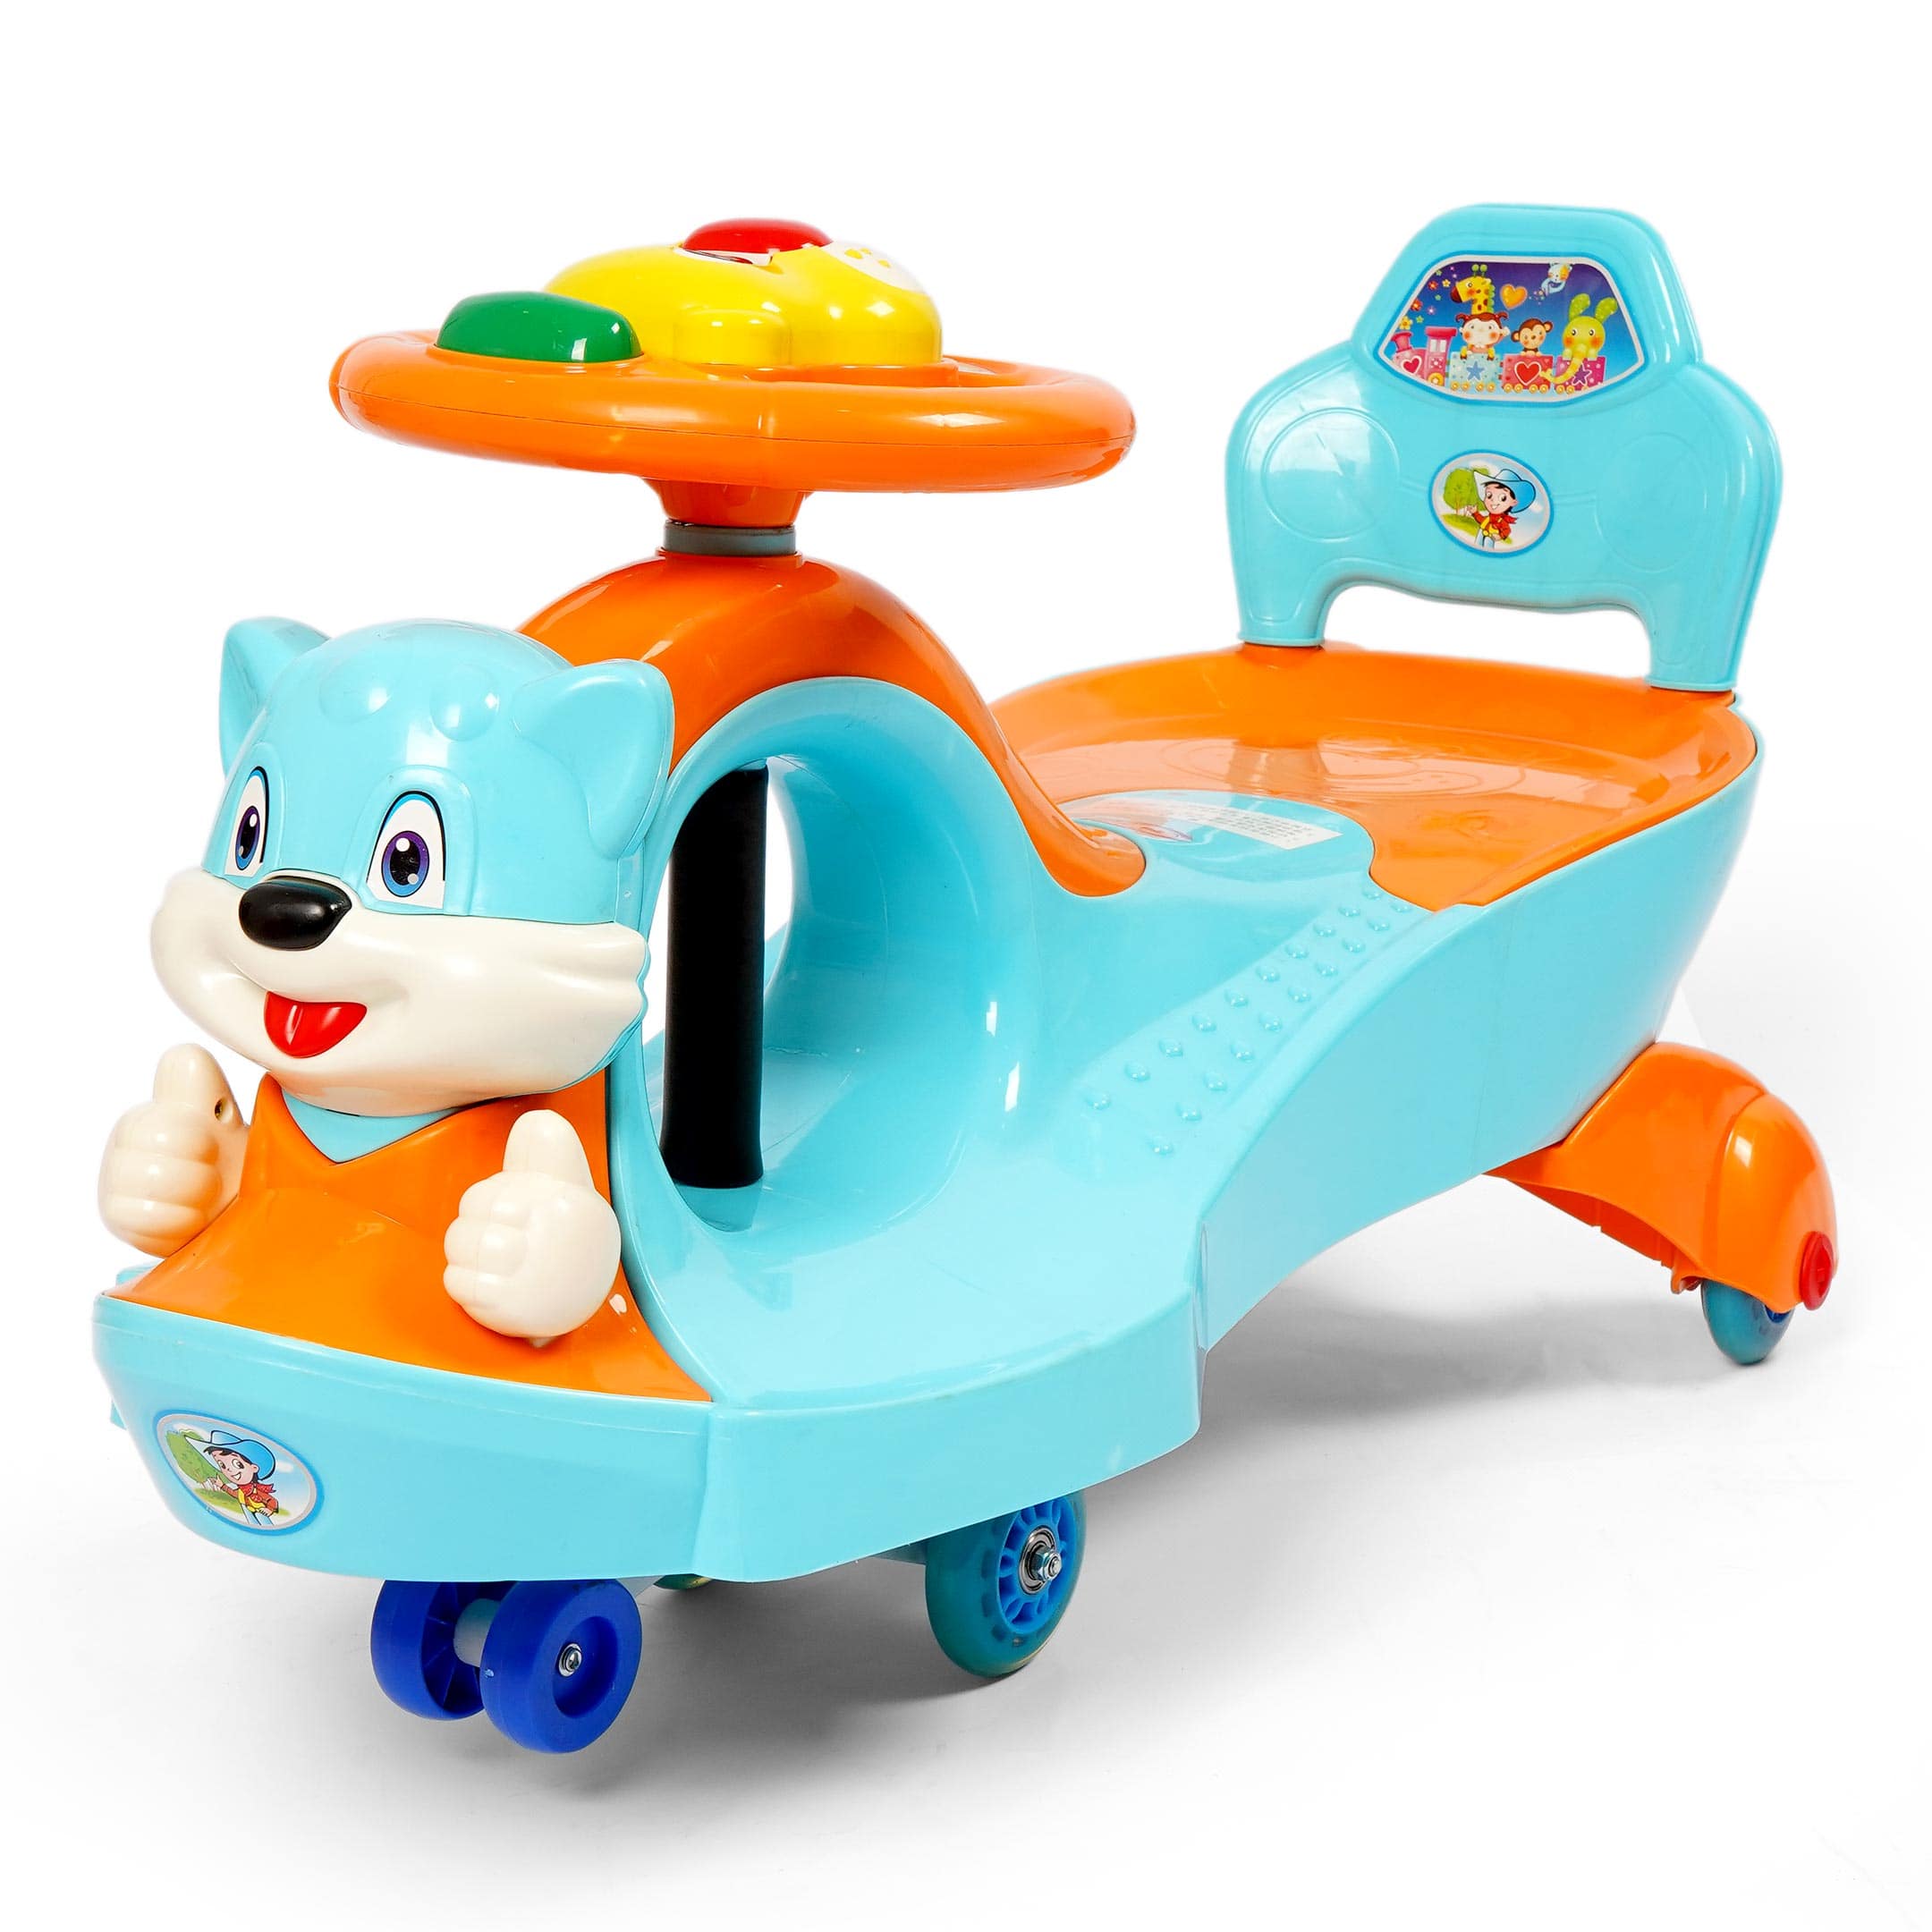 Kitty Cat Twister Auto Ride-on Car